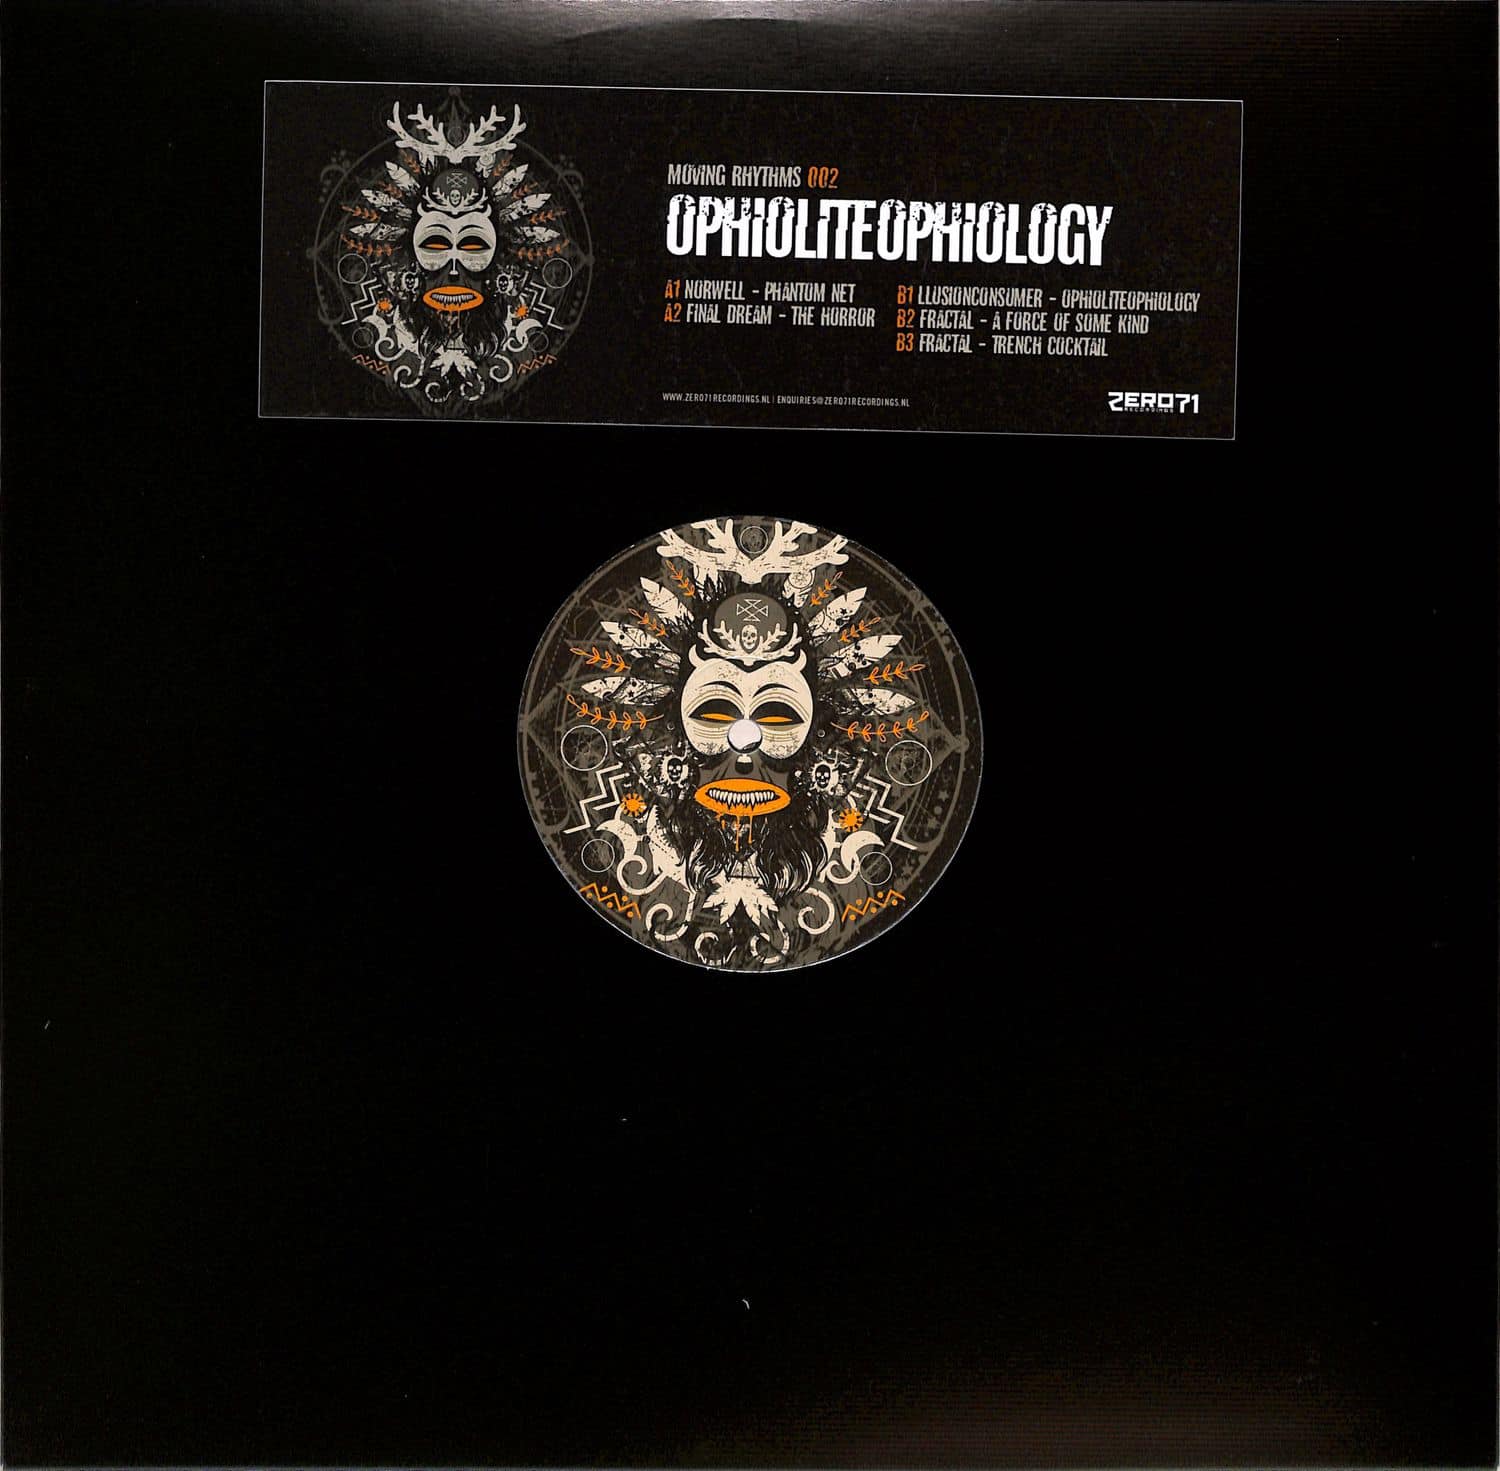 Various Artists - OPHIOLITEOPHIOLOGY